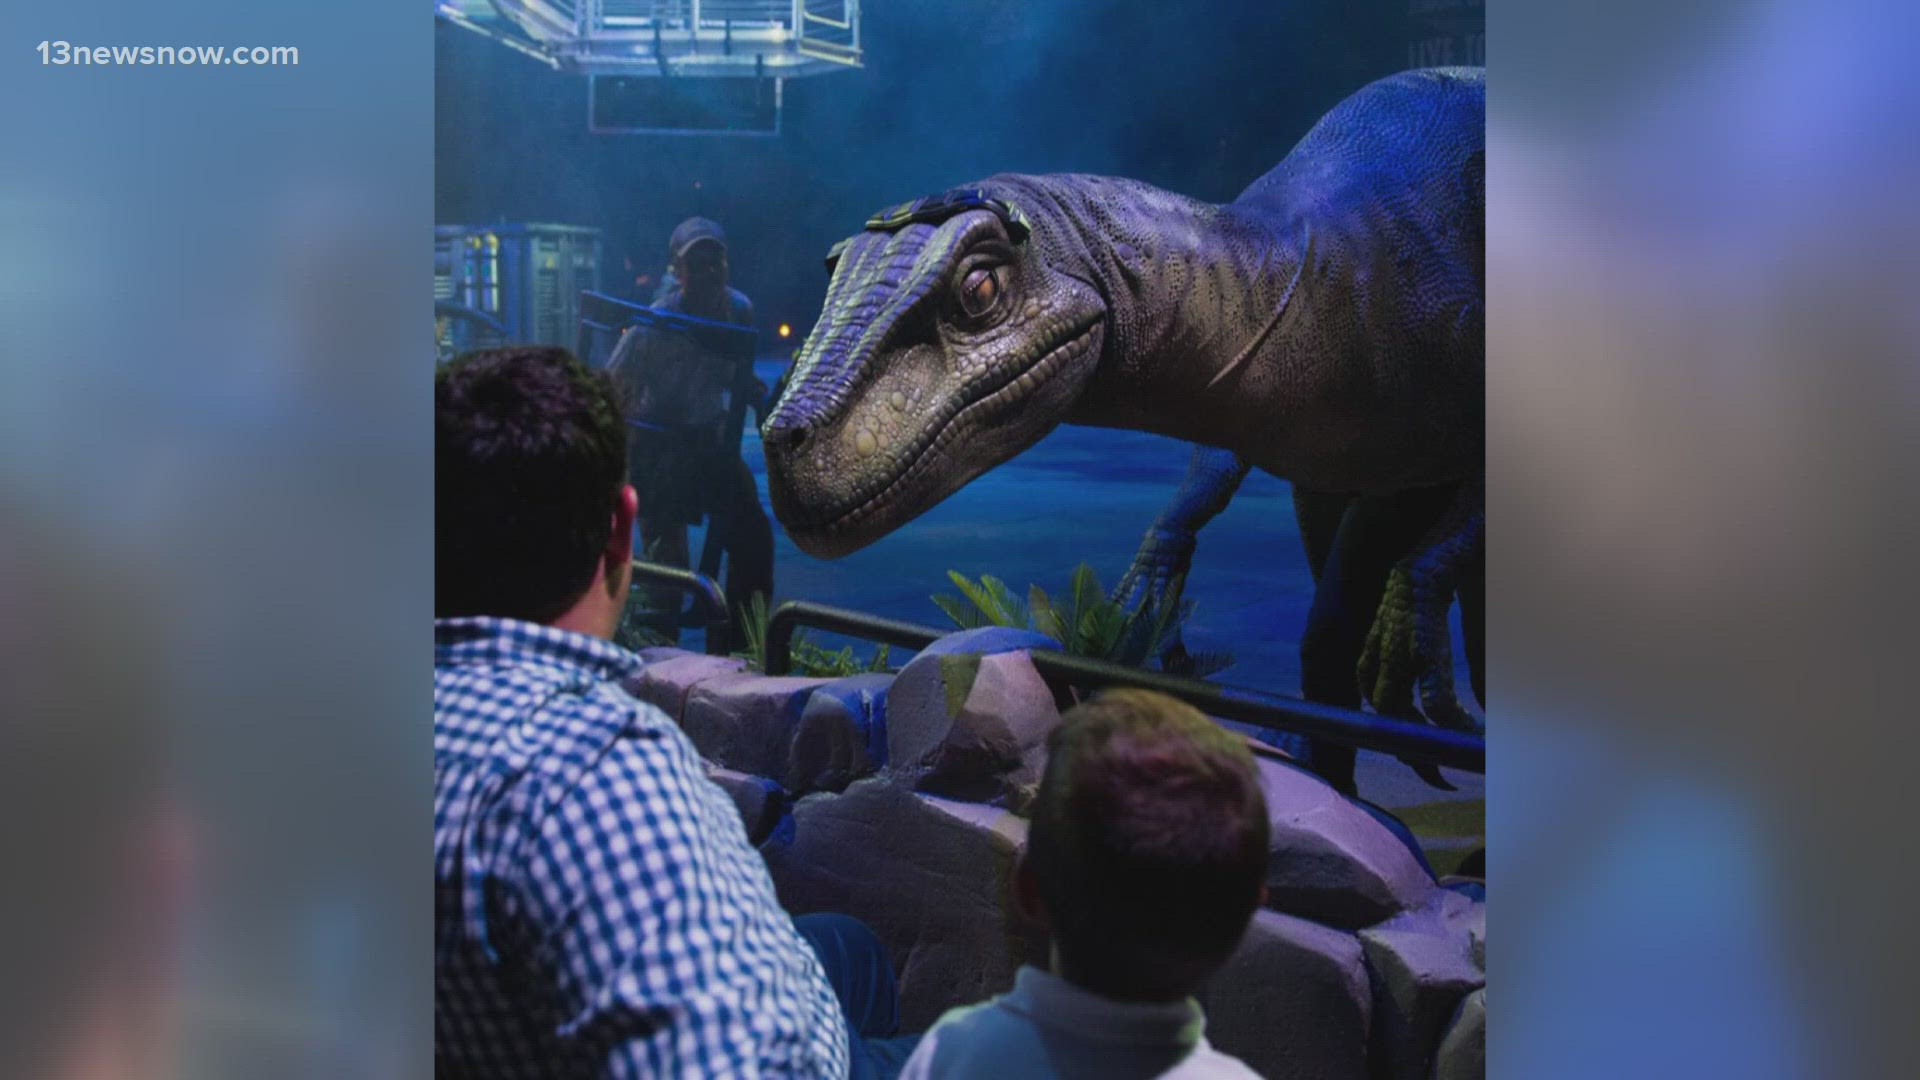 For the first time ever, the Jurassic World Live Tour is roaring into Hampton Coliseum and it's all happening this weekend!